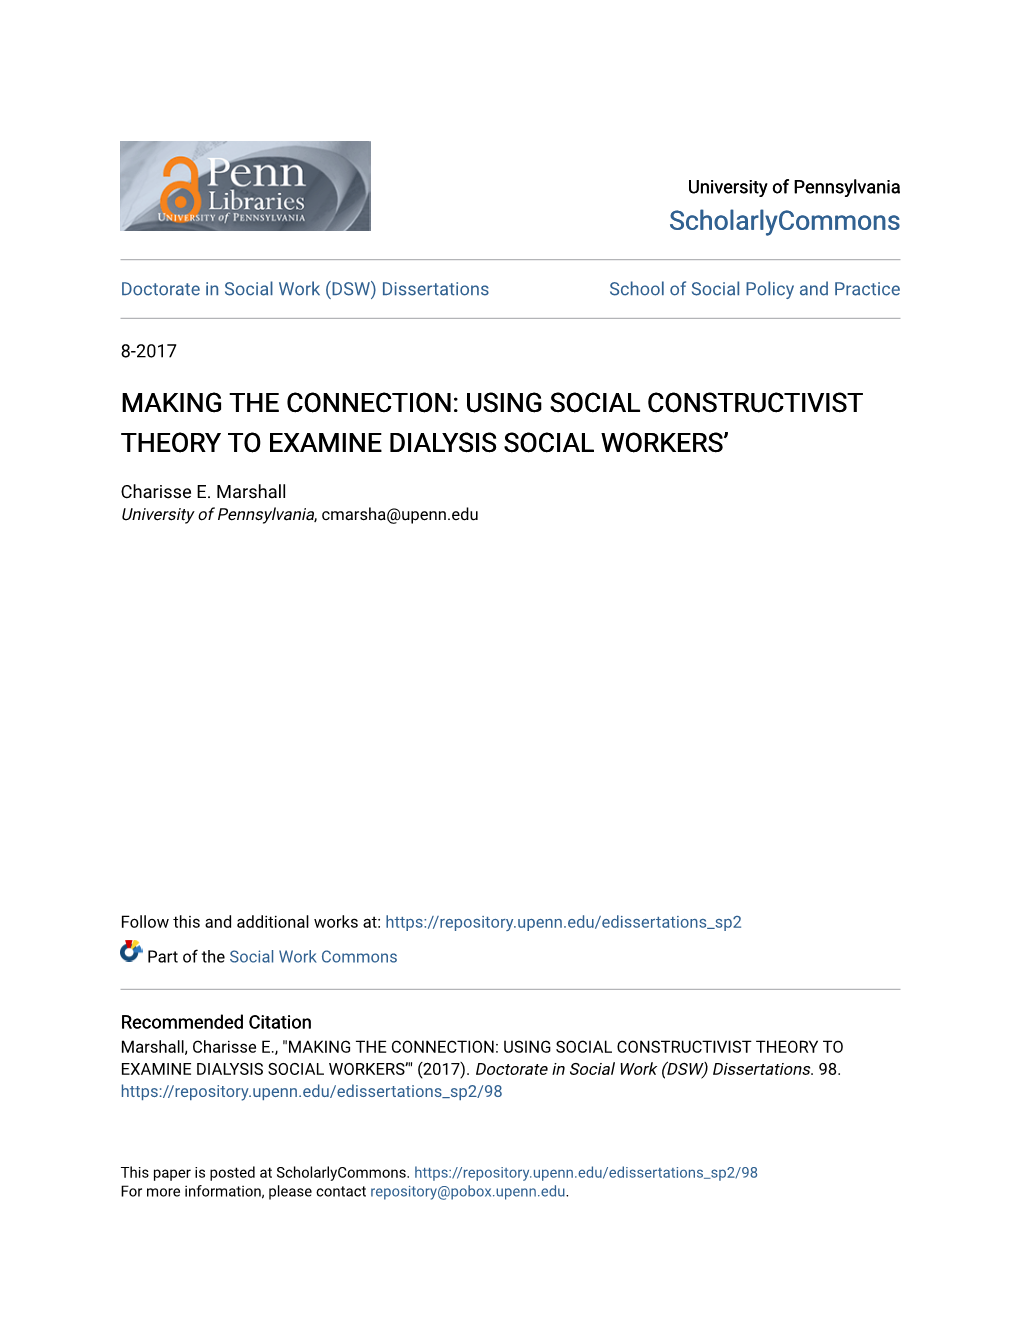 Making the Connection: Using Social Constructivist Theory to Examine Dialysis Social Workers’